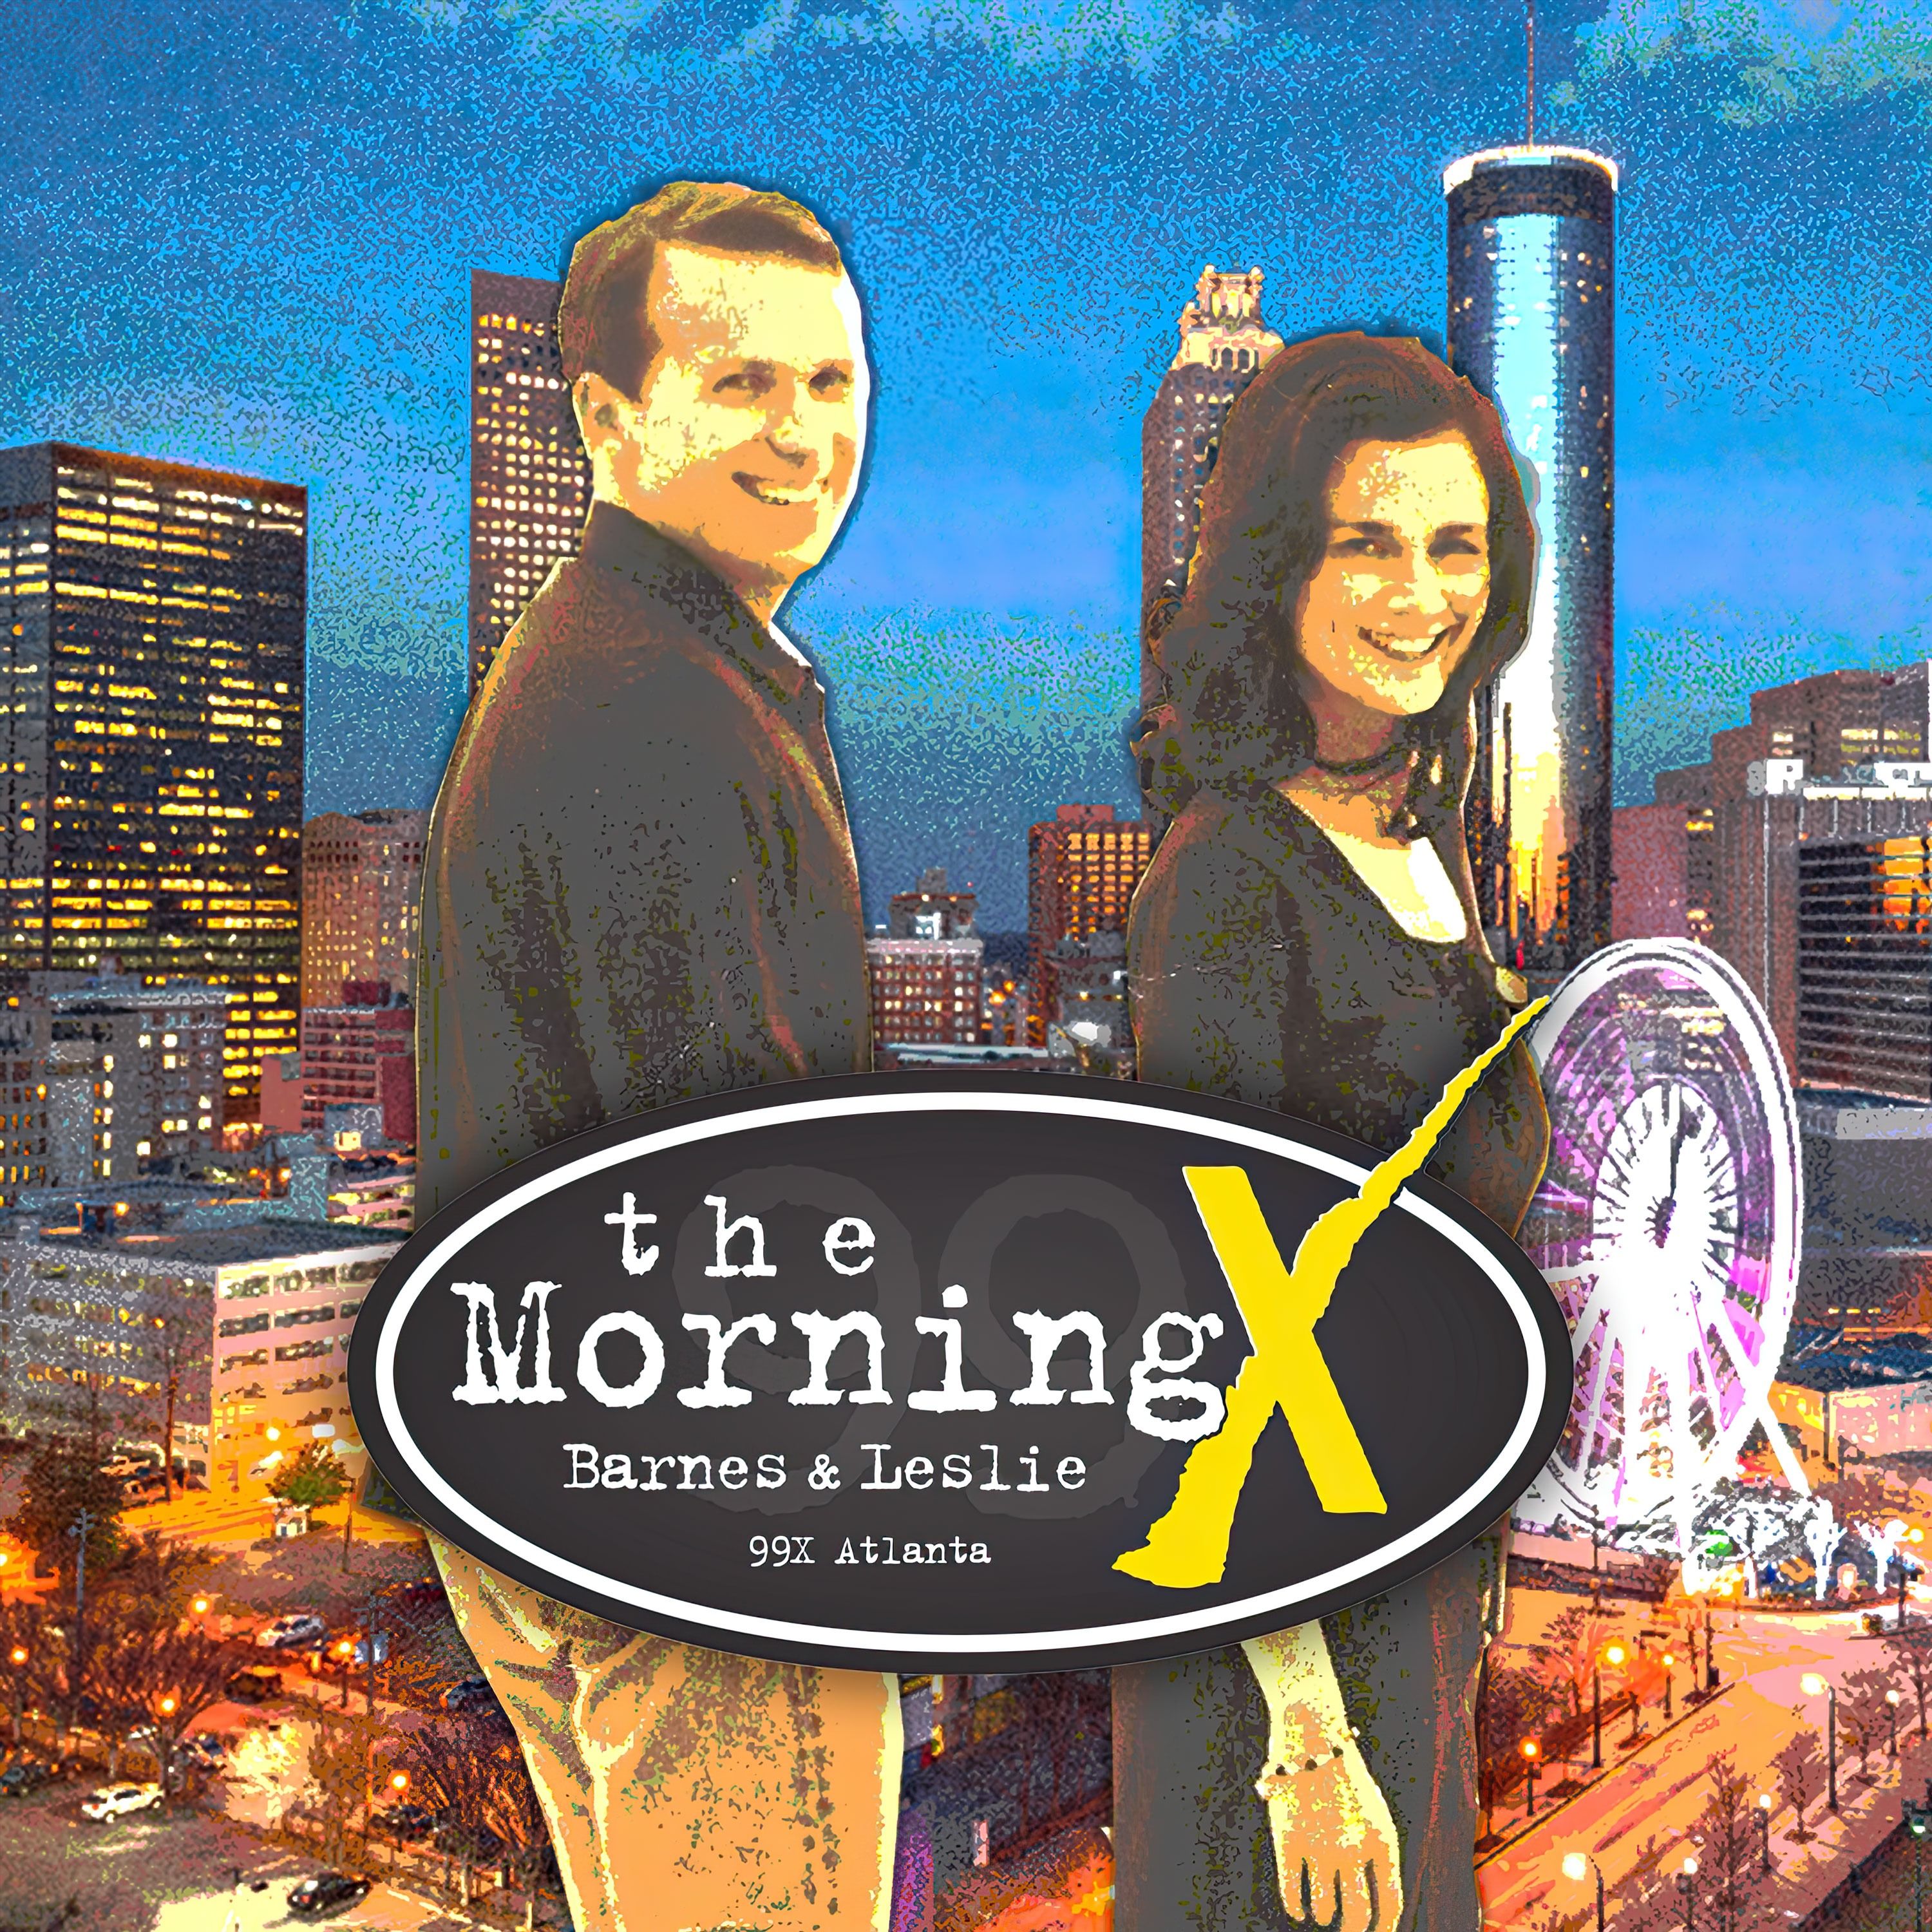 Michael Chiklis Joins The Morning X (INTERVIEW) Part 2